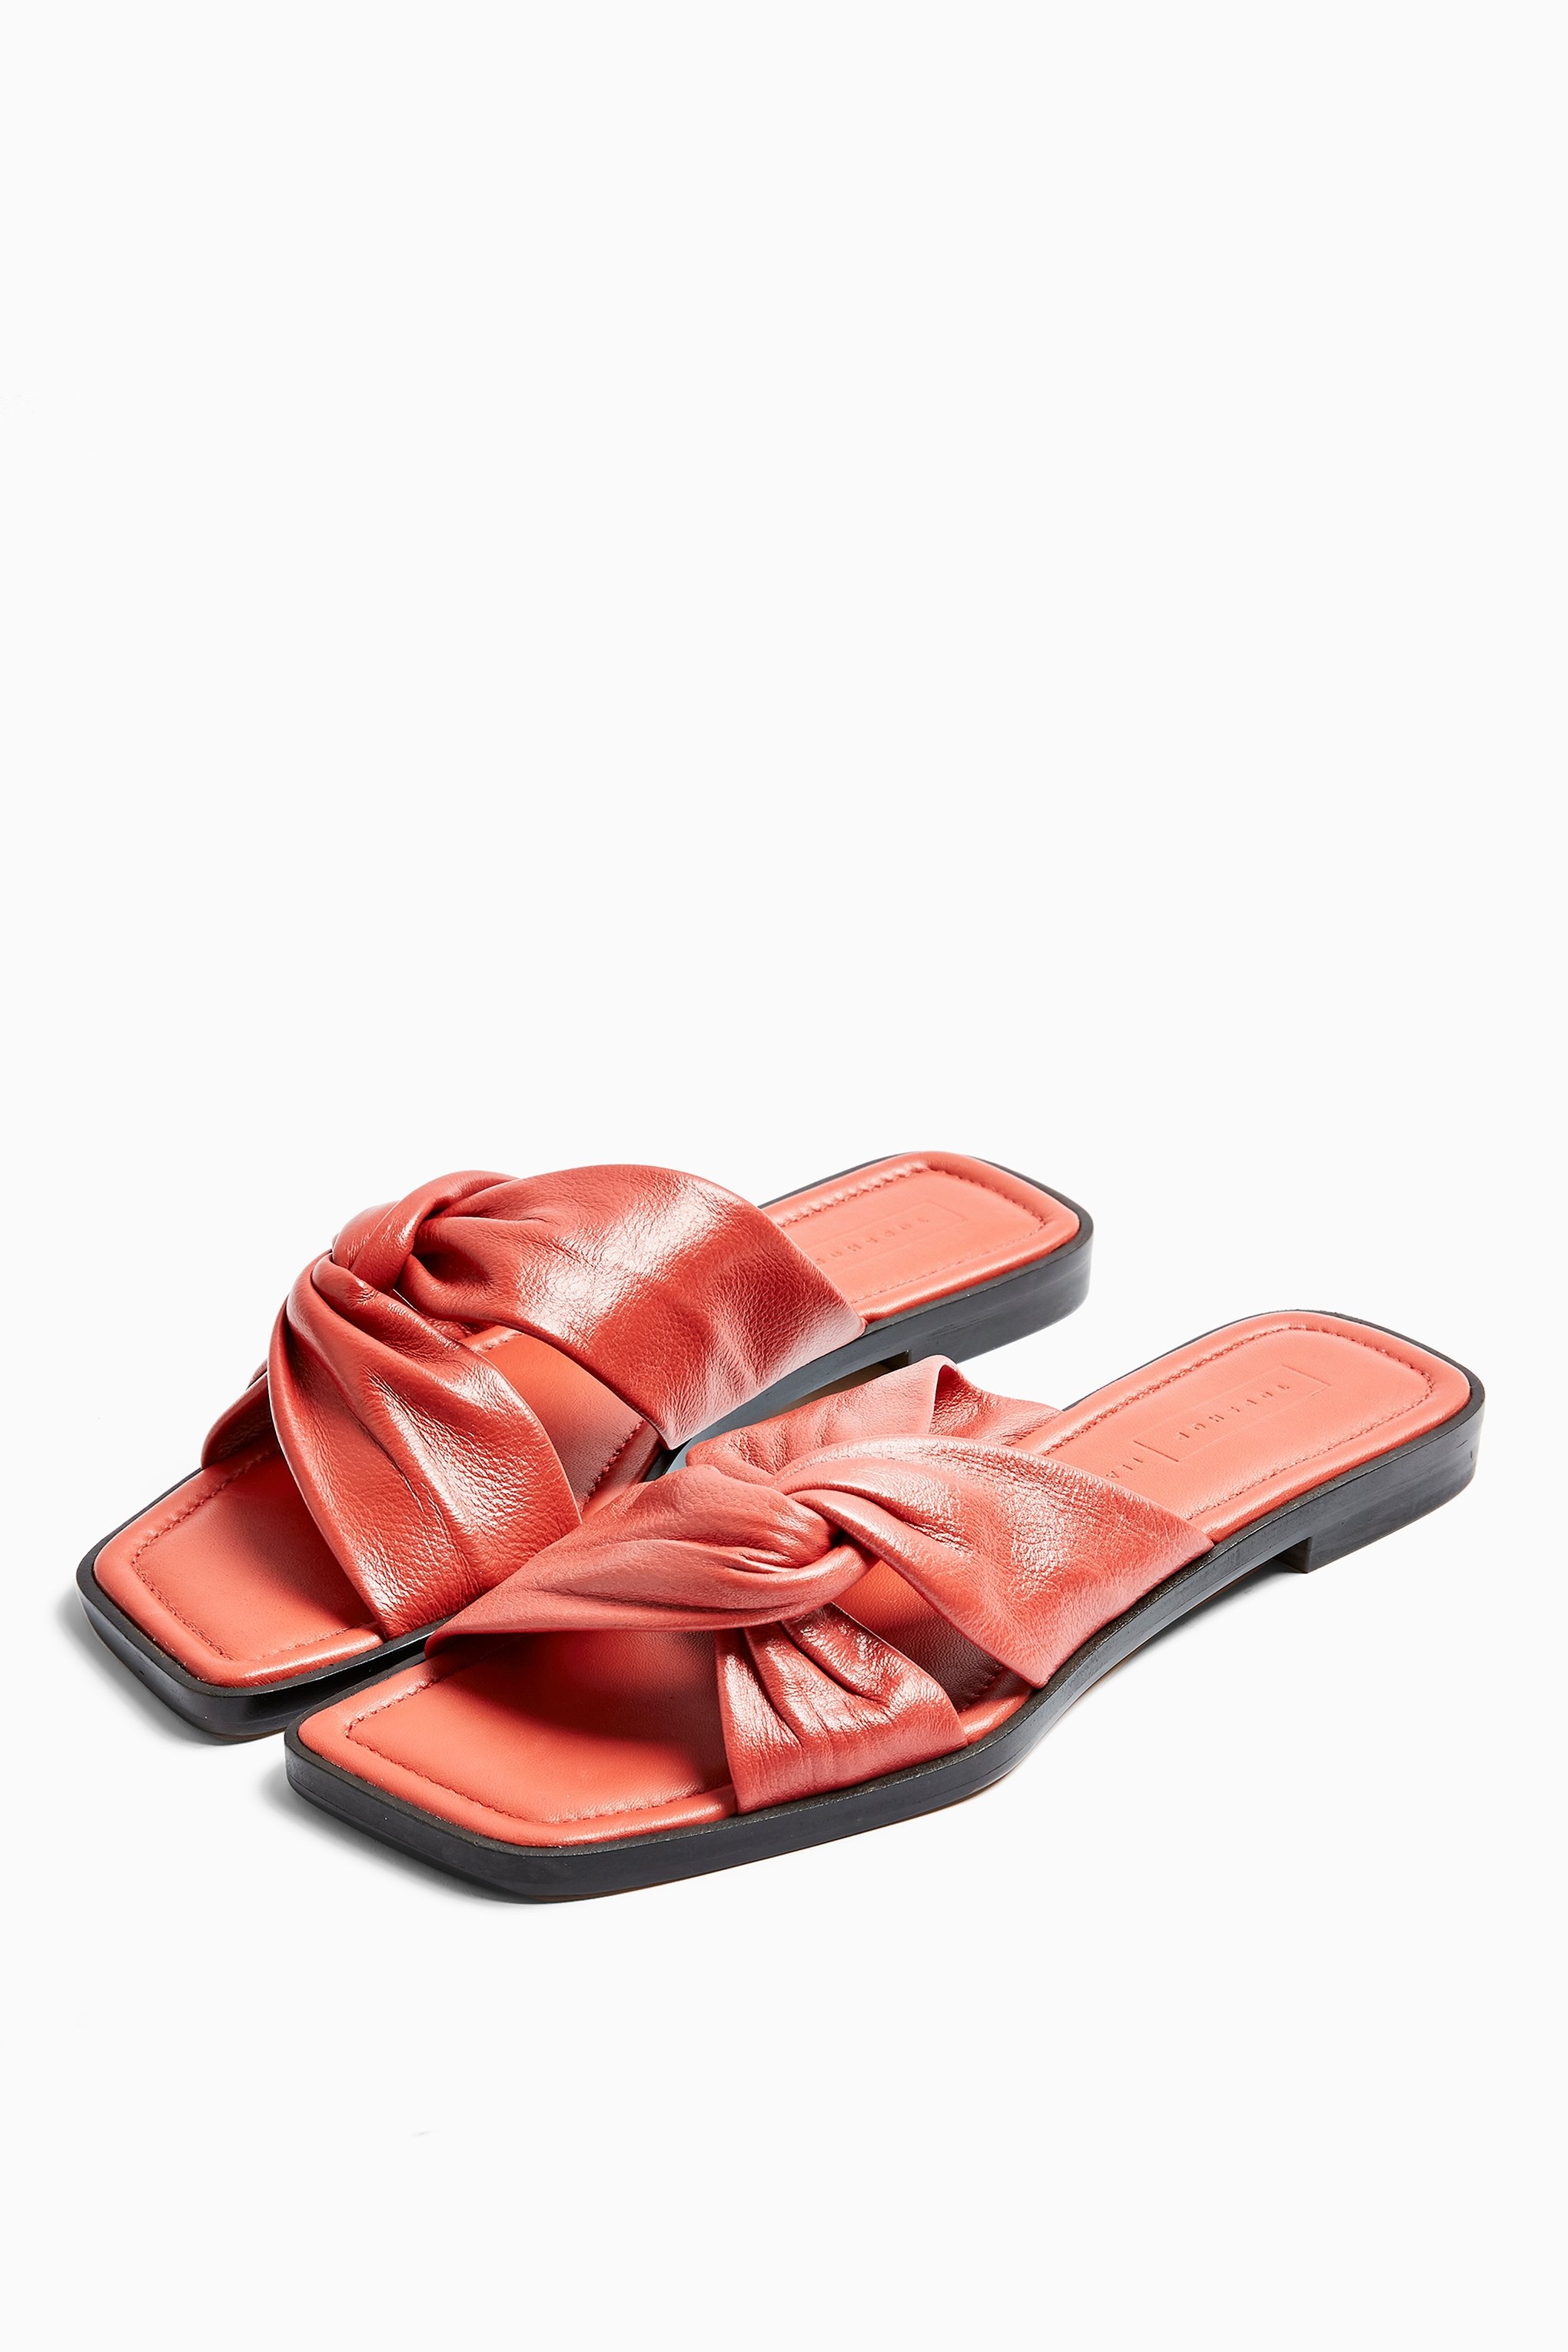 Pacific Coral Leather Twist Sandals